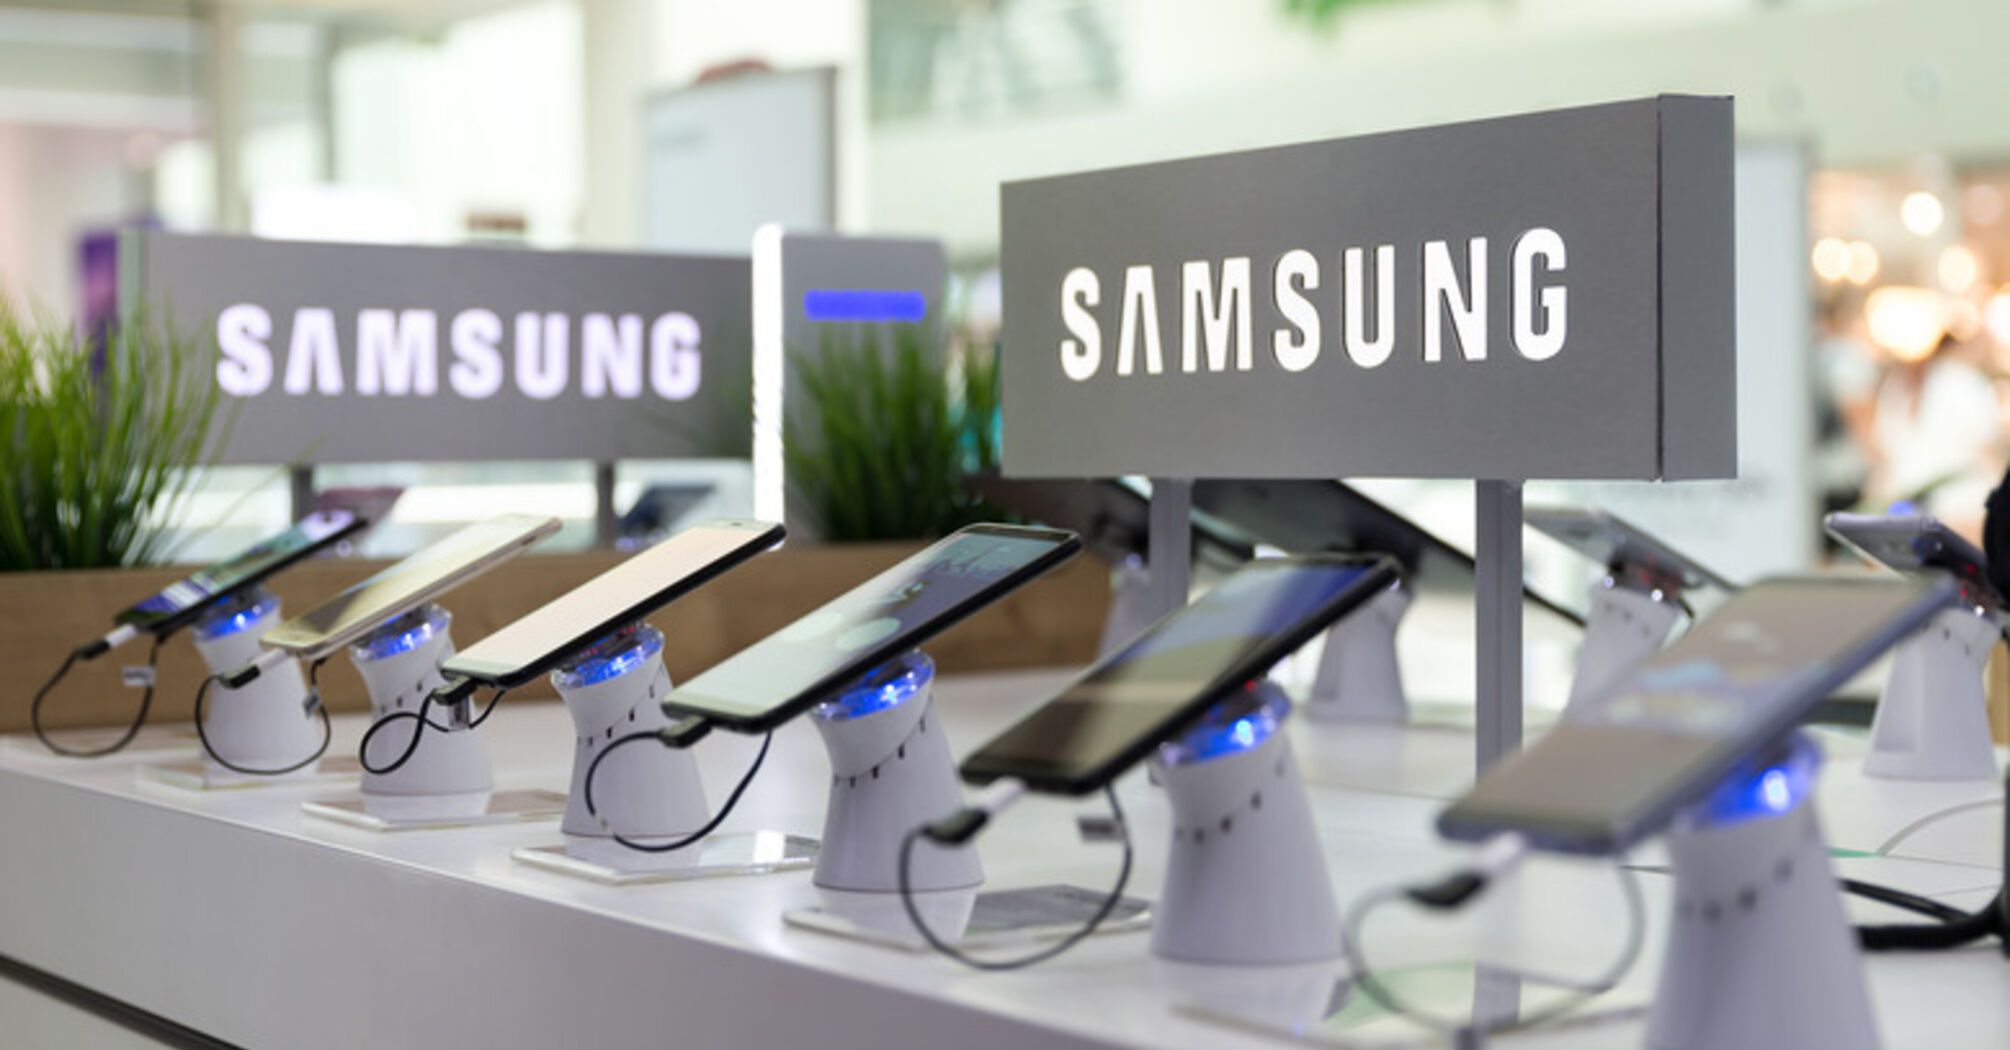 5 fascinating facts about the Samsung brand